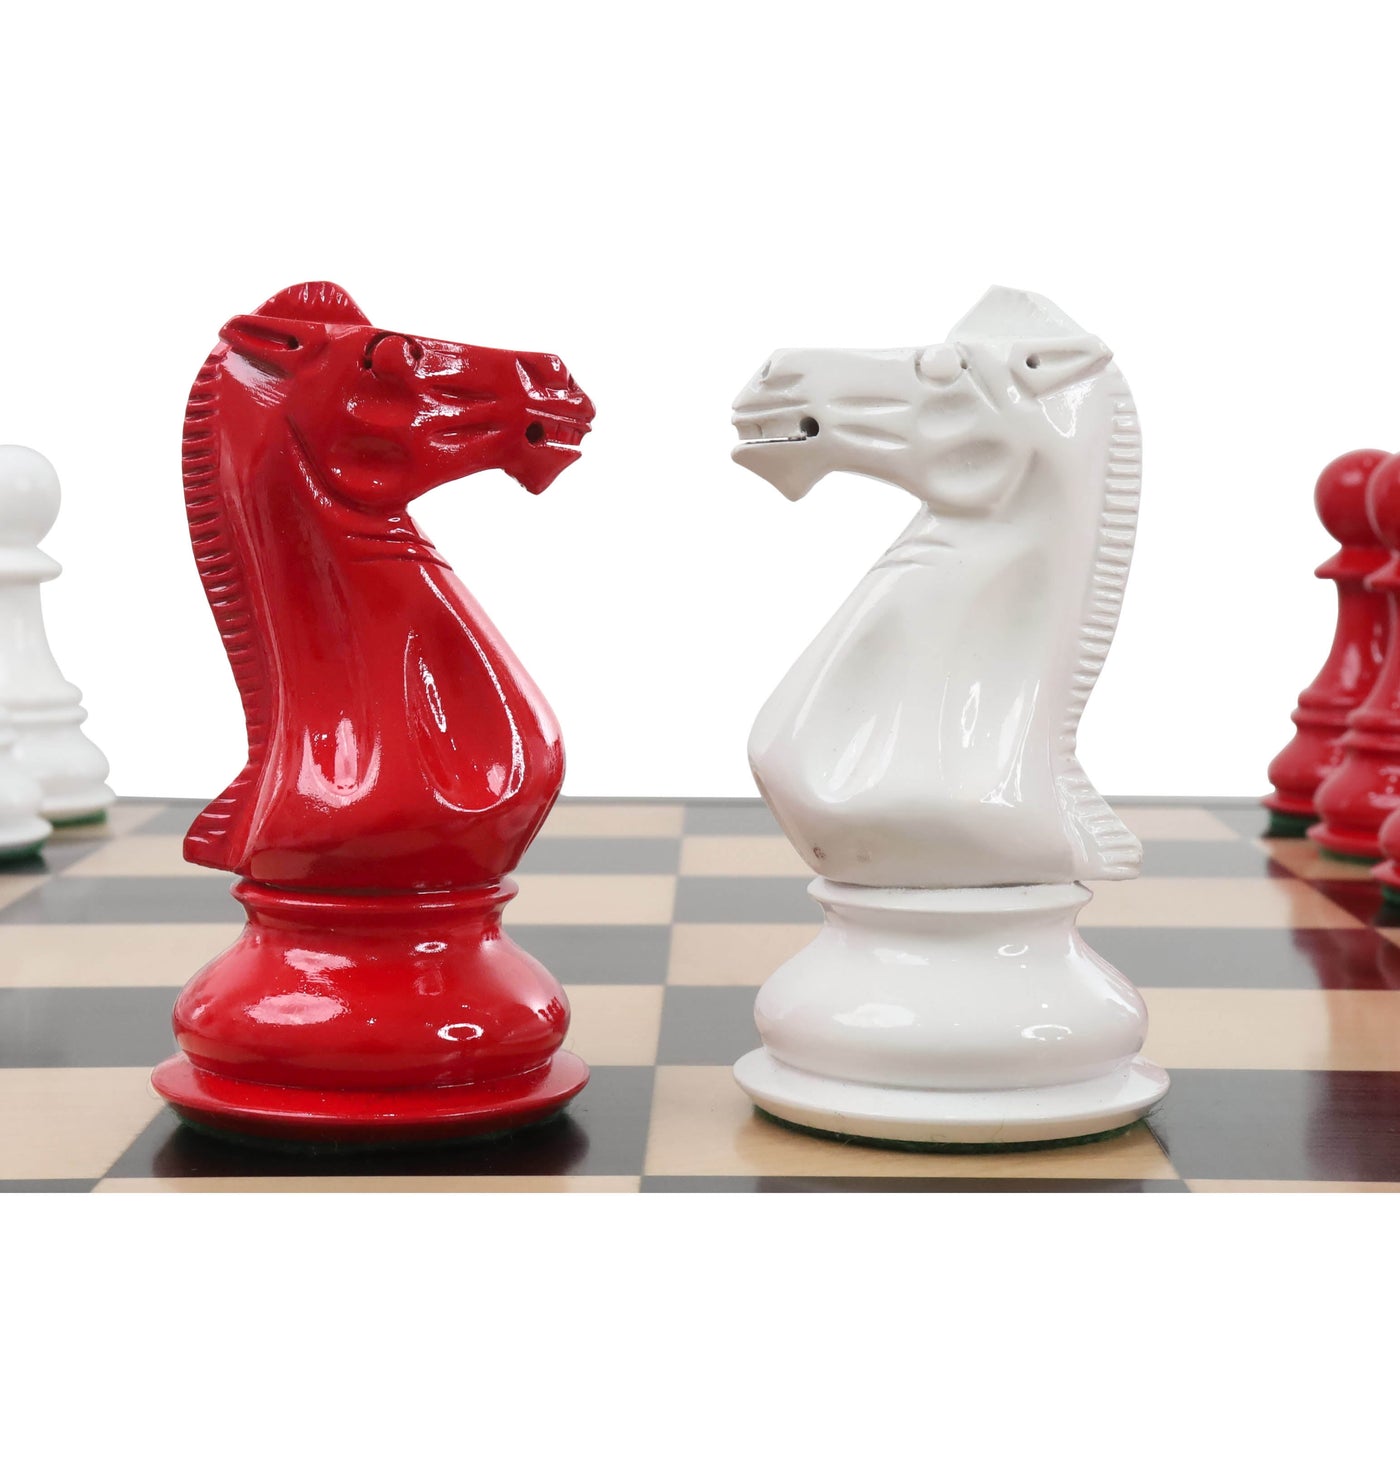 6.3" Jumbo Pro Staunton Luxury Chess Set - Chess Pieces Only - Red & White Lacquered